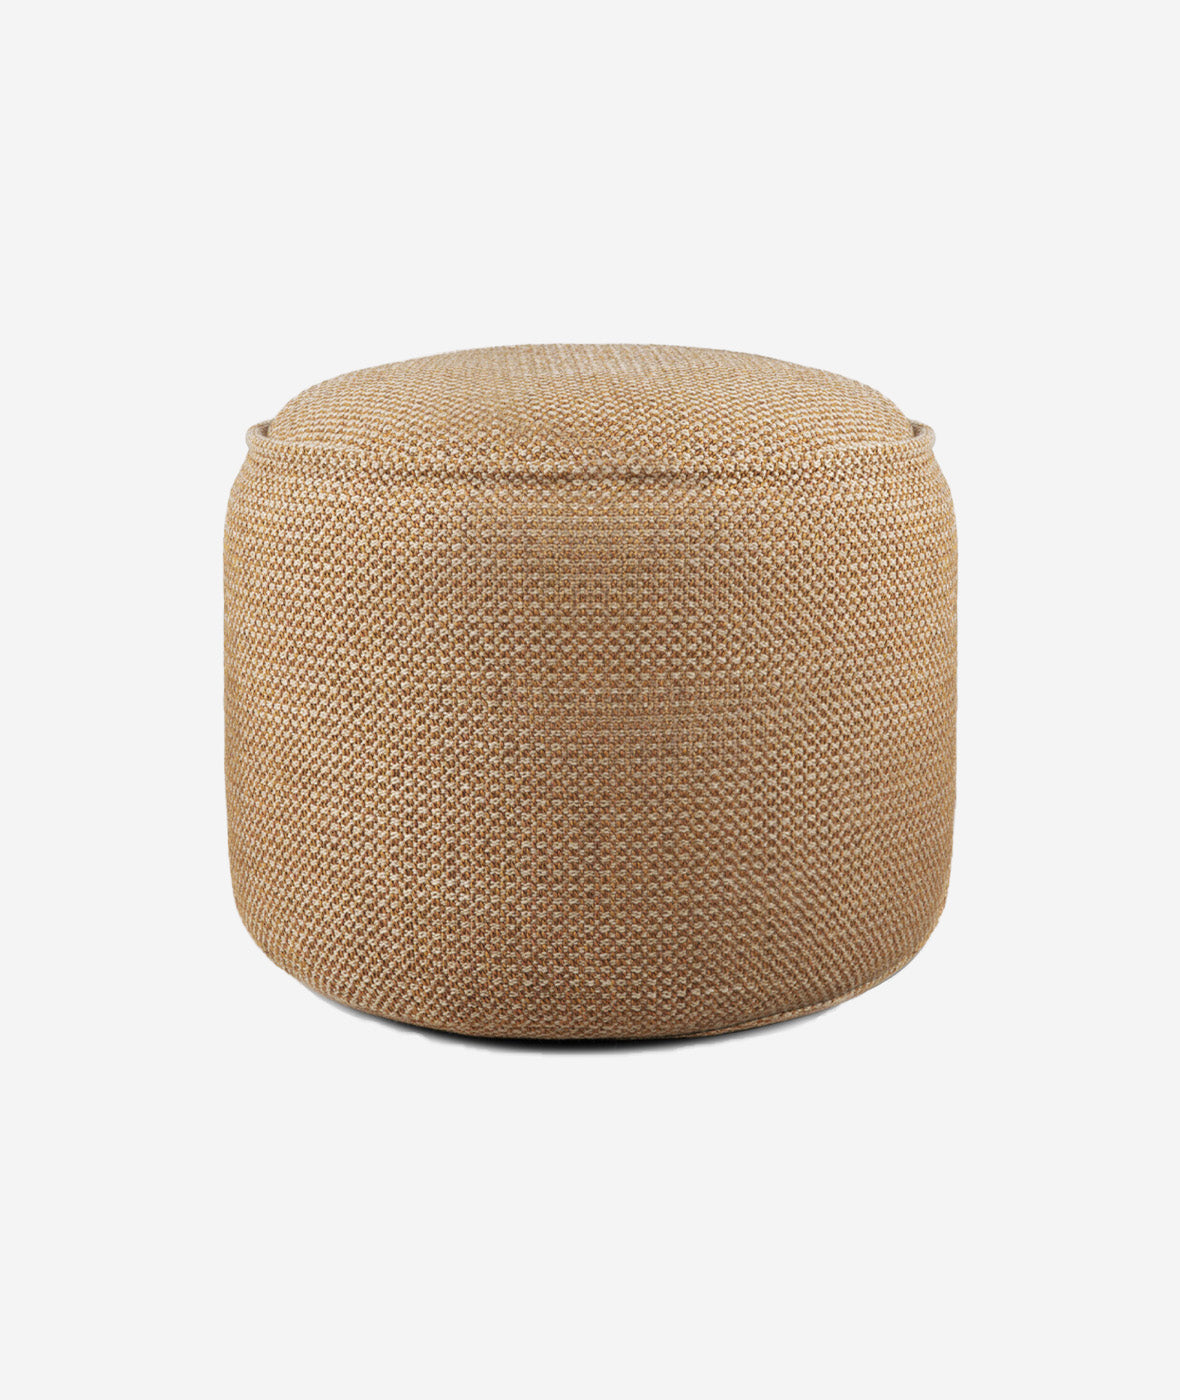 Donut Outdoor Pouf - More Options